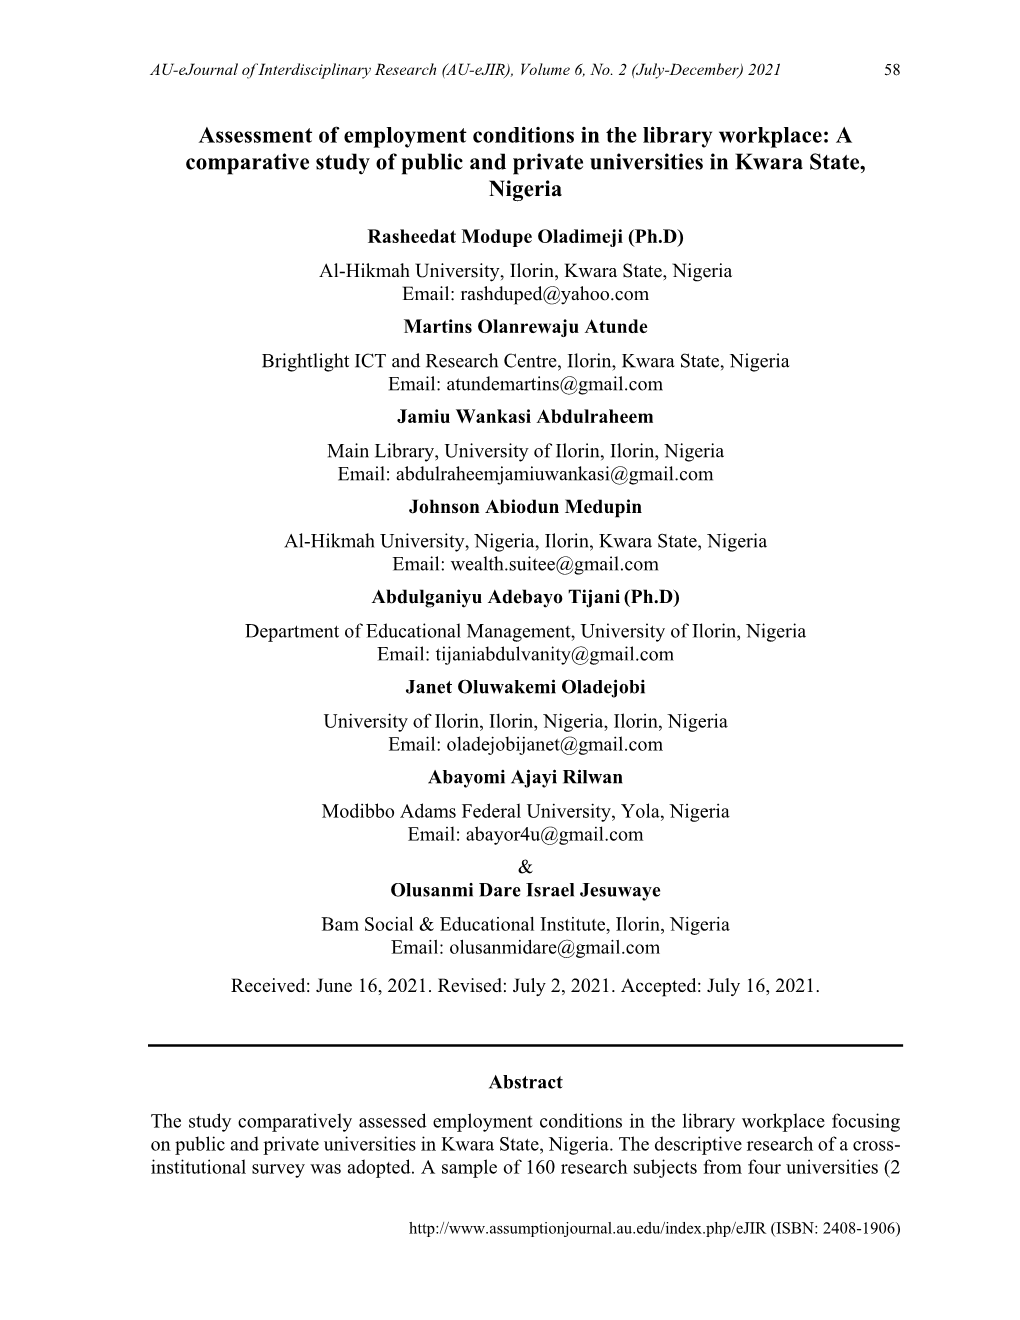 Assessment of Employment Conditions in the Library Workplace: a Comparative Study of Public and Private Universities in Kwara State, Nigeria